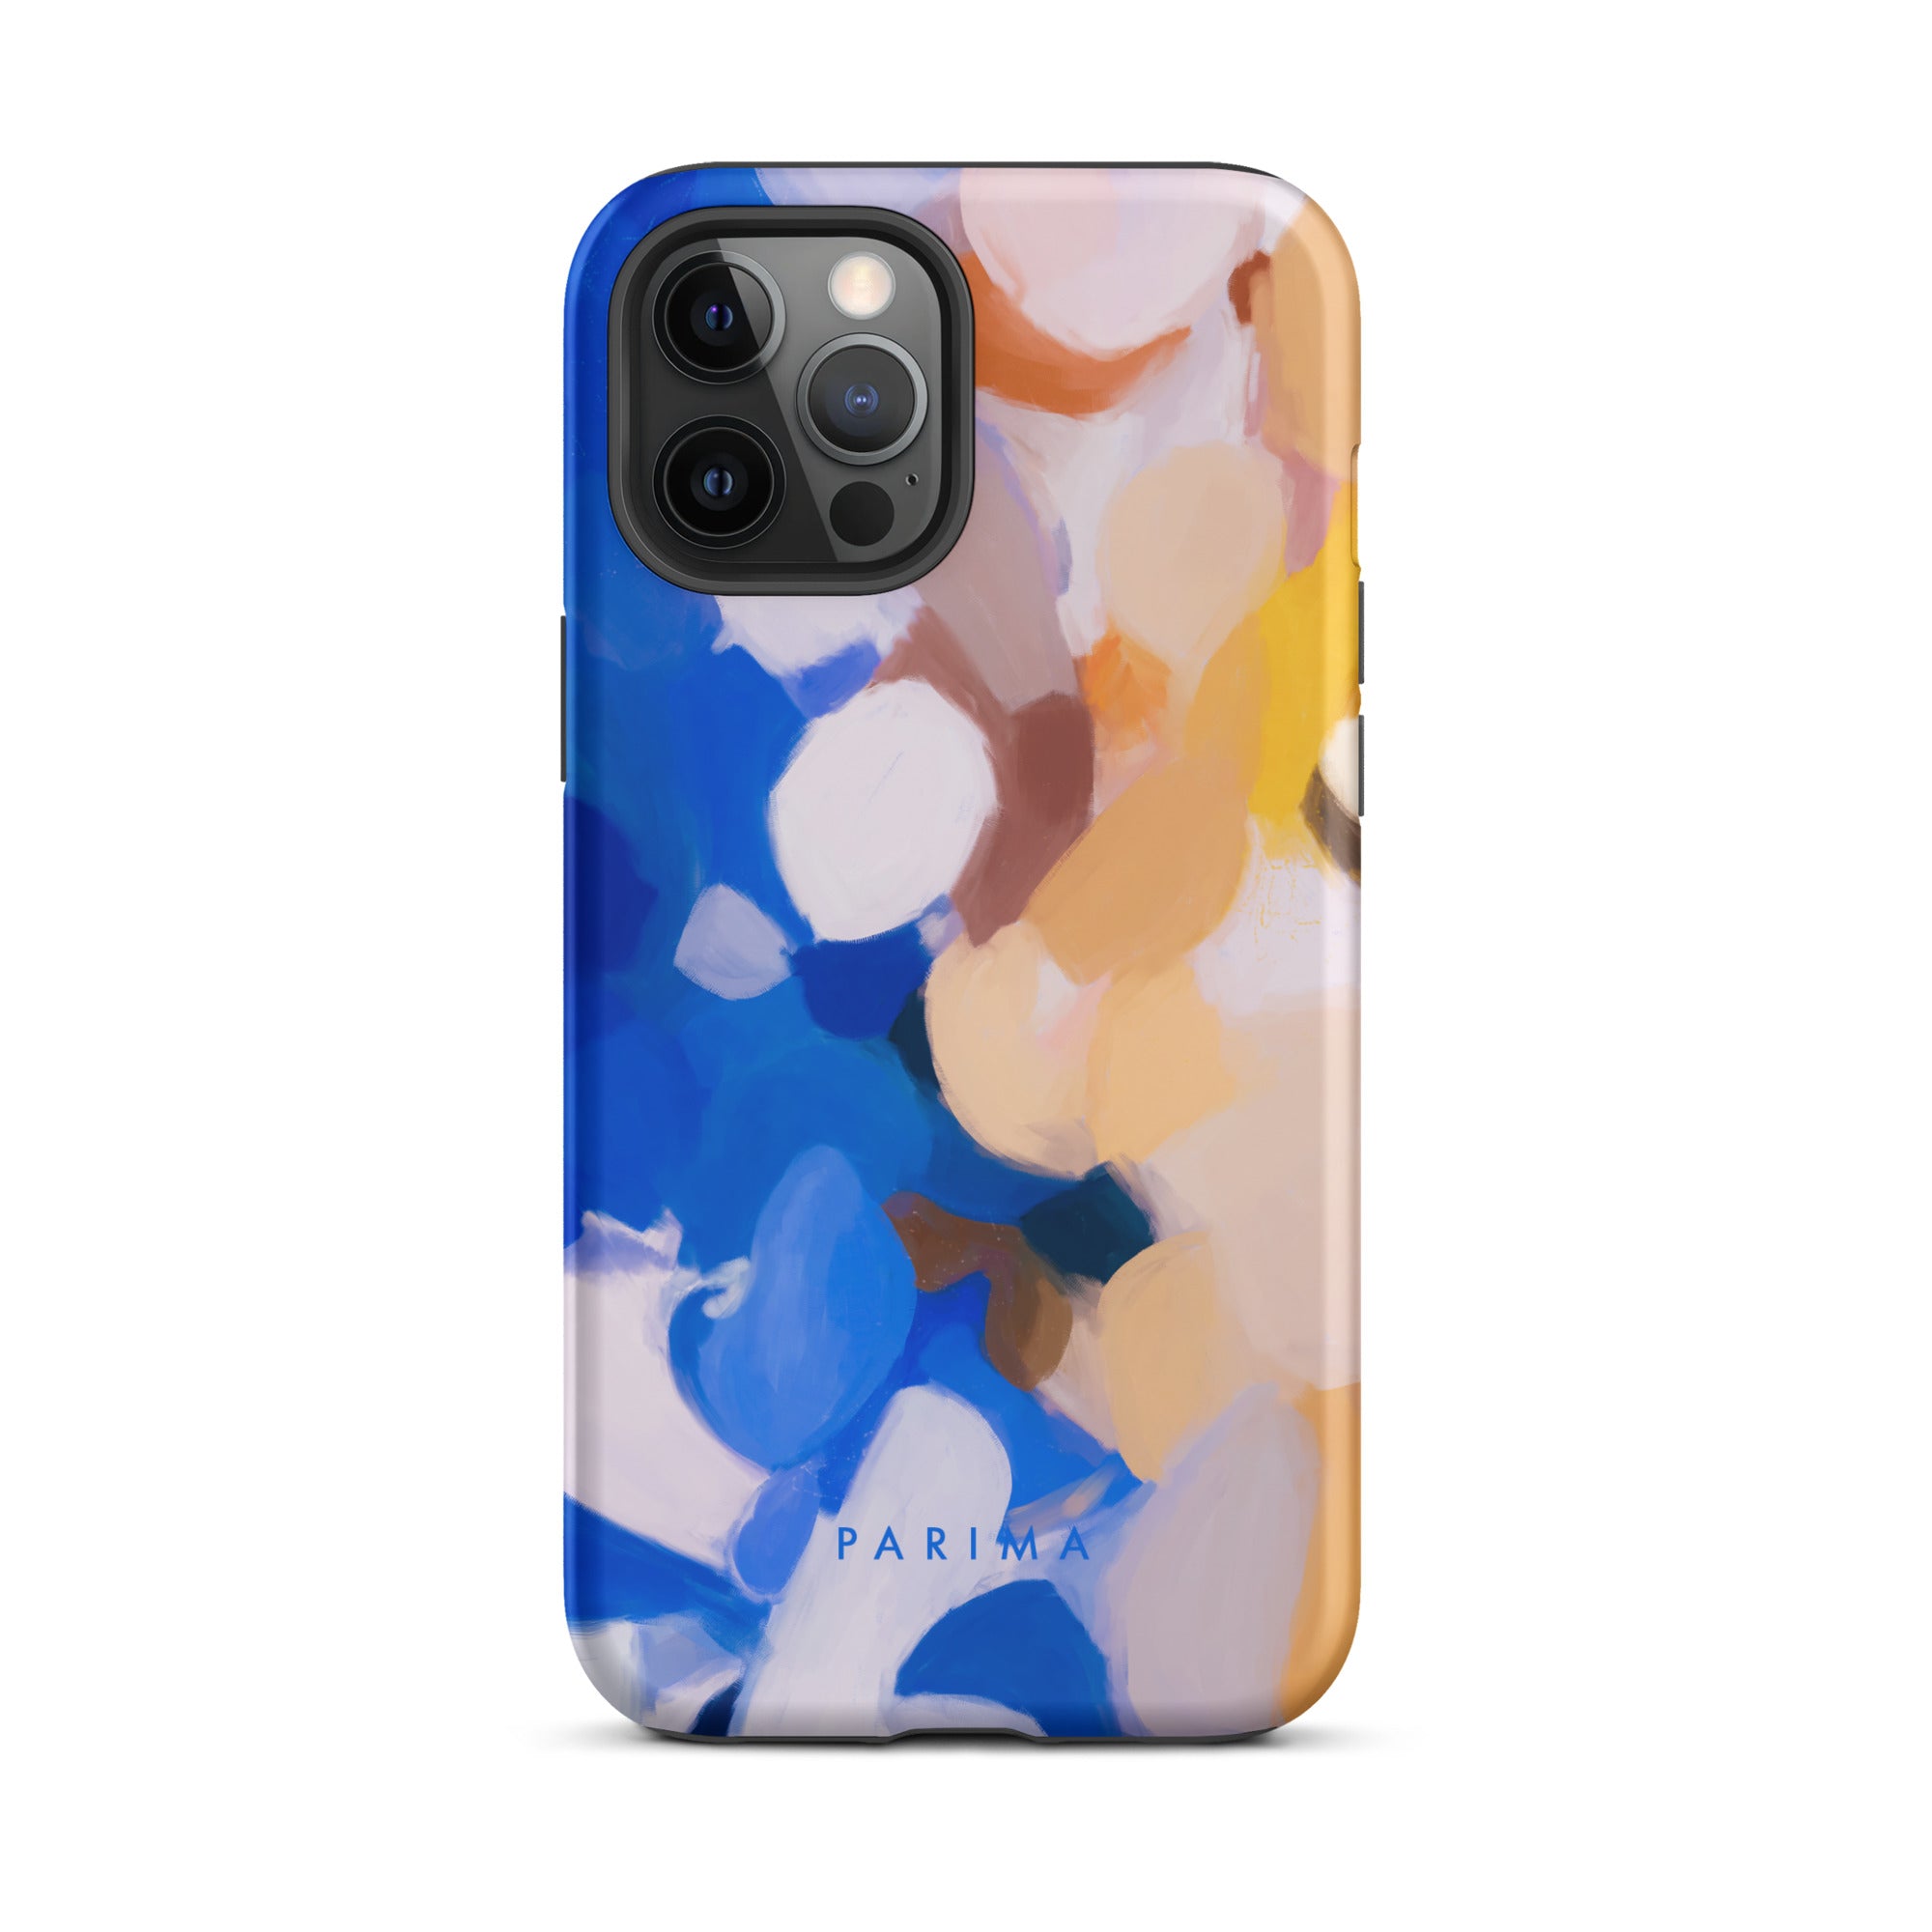 Bluebell, blue and yellow abstract art - iPhone 12 Pro Max tough case by Parima Studio